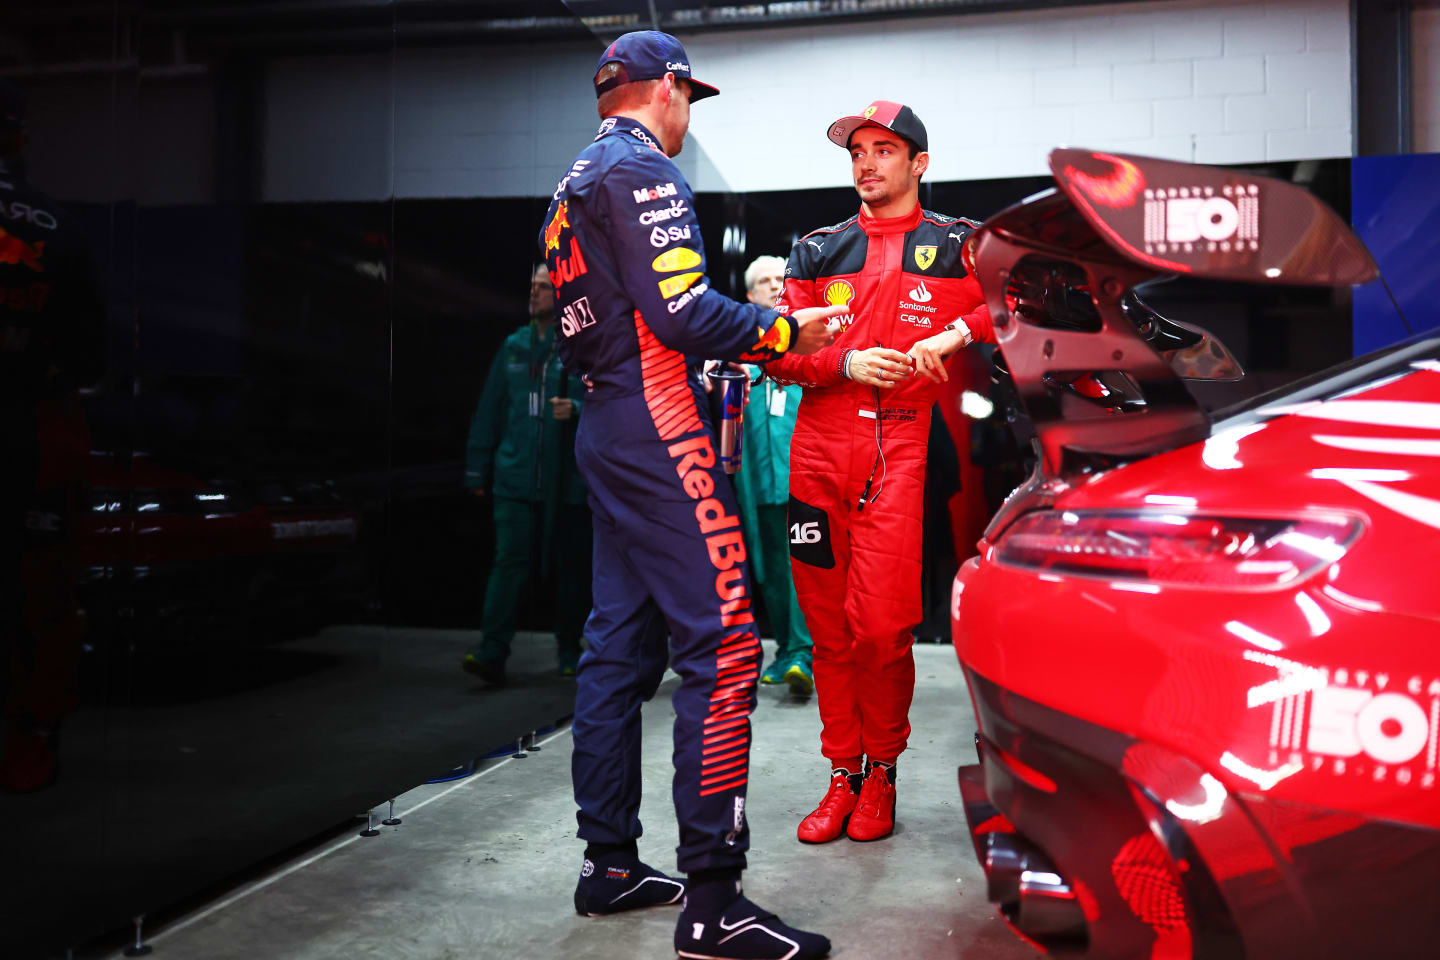 SAO PAULO, BRAZIL - NOVEMBER 03: Second placed qualifier Charles Leclerc of Monaco and Ferrari talks with Pole position qualifier Max Verstappen of the Netherlands and Oracle Red Bull Racing in the FIA Garage after qualifying ahead of the F1 Grand Prix of Brazil at Autodromo Jose Carlos Pace on November 03, 2023 in Sao Paulo, Brazil. (Photo by Dan Istitene - Formula 1/Formula 1 via Getty Images)